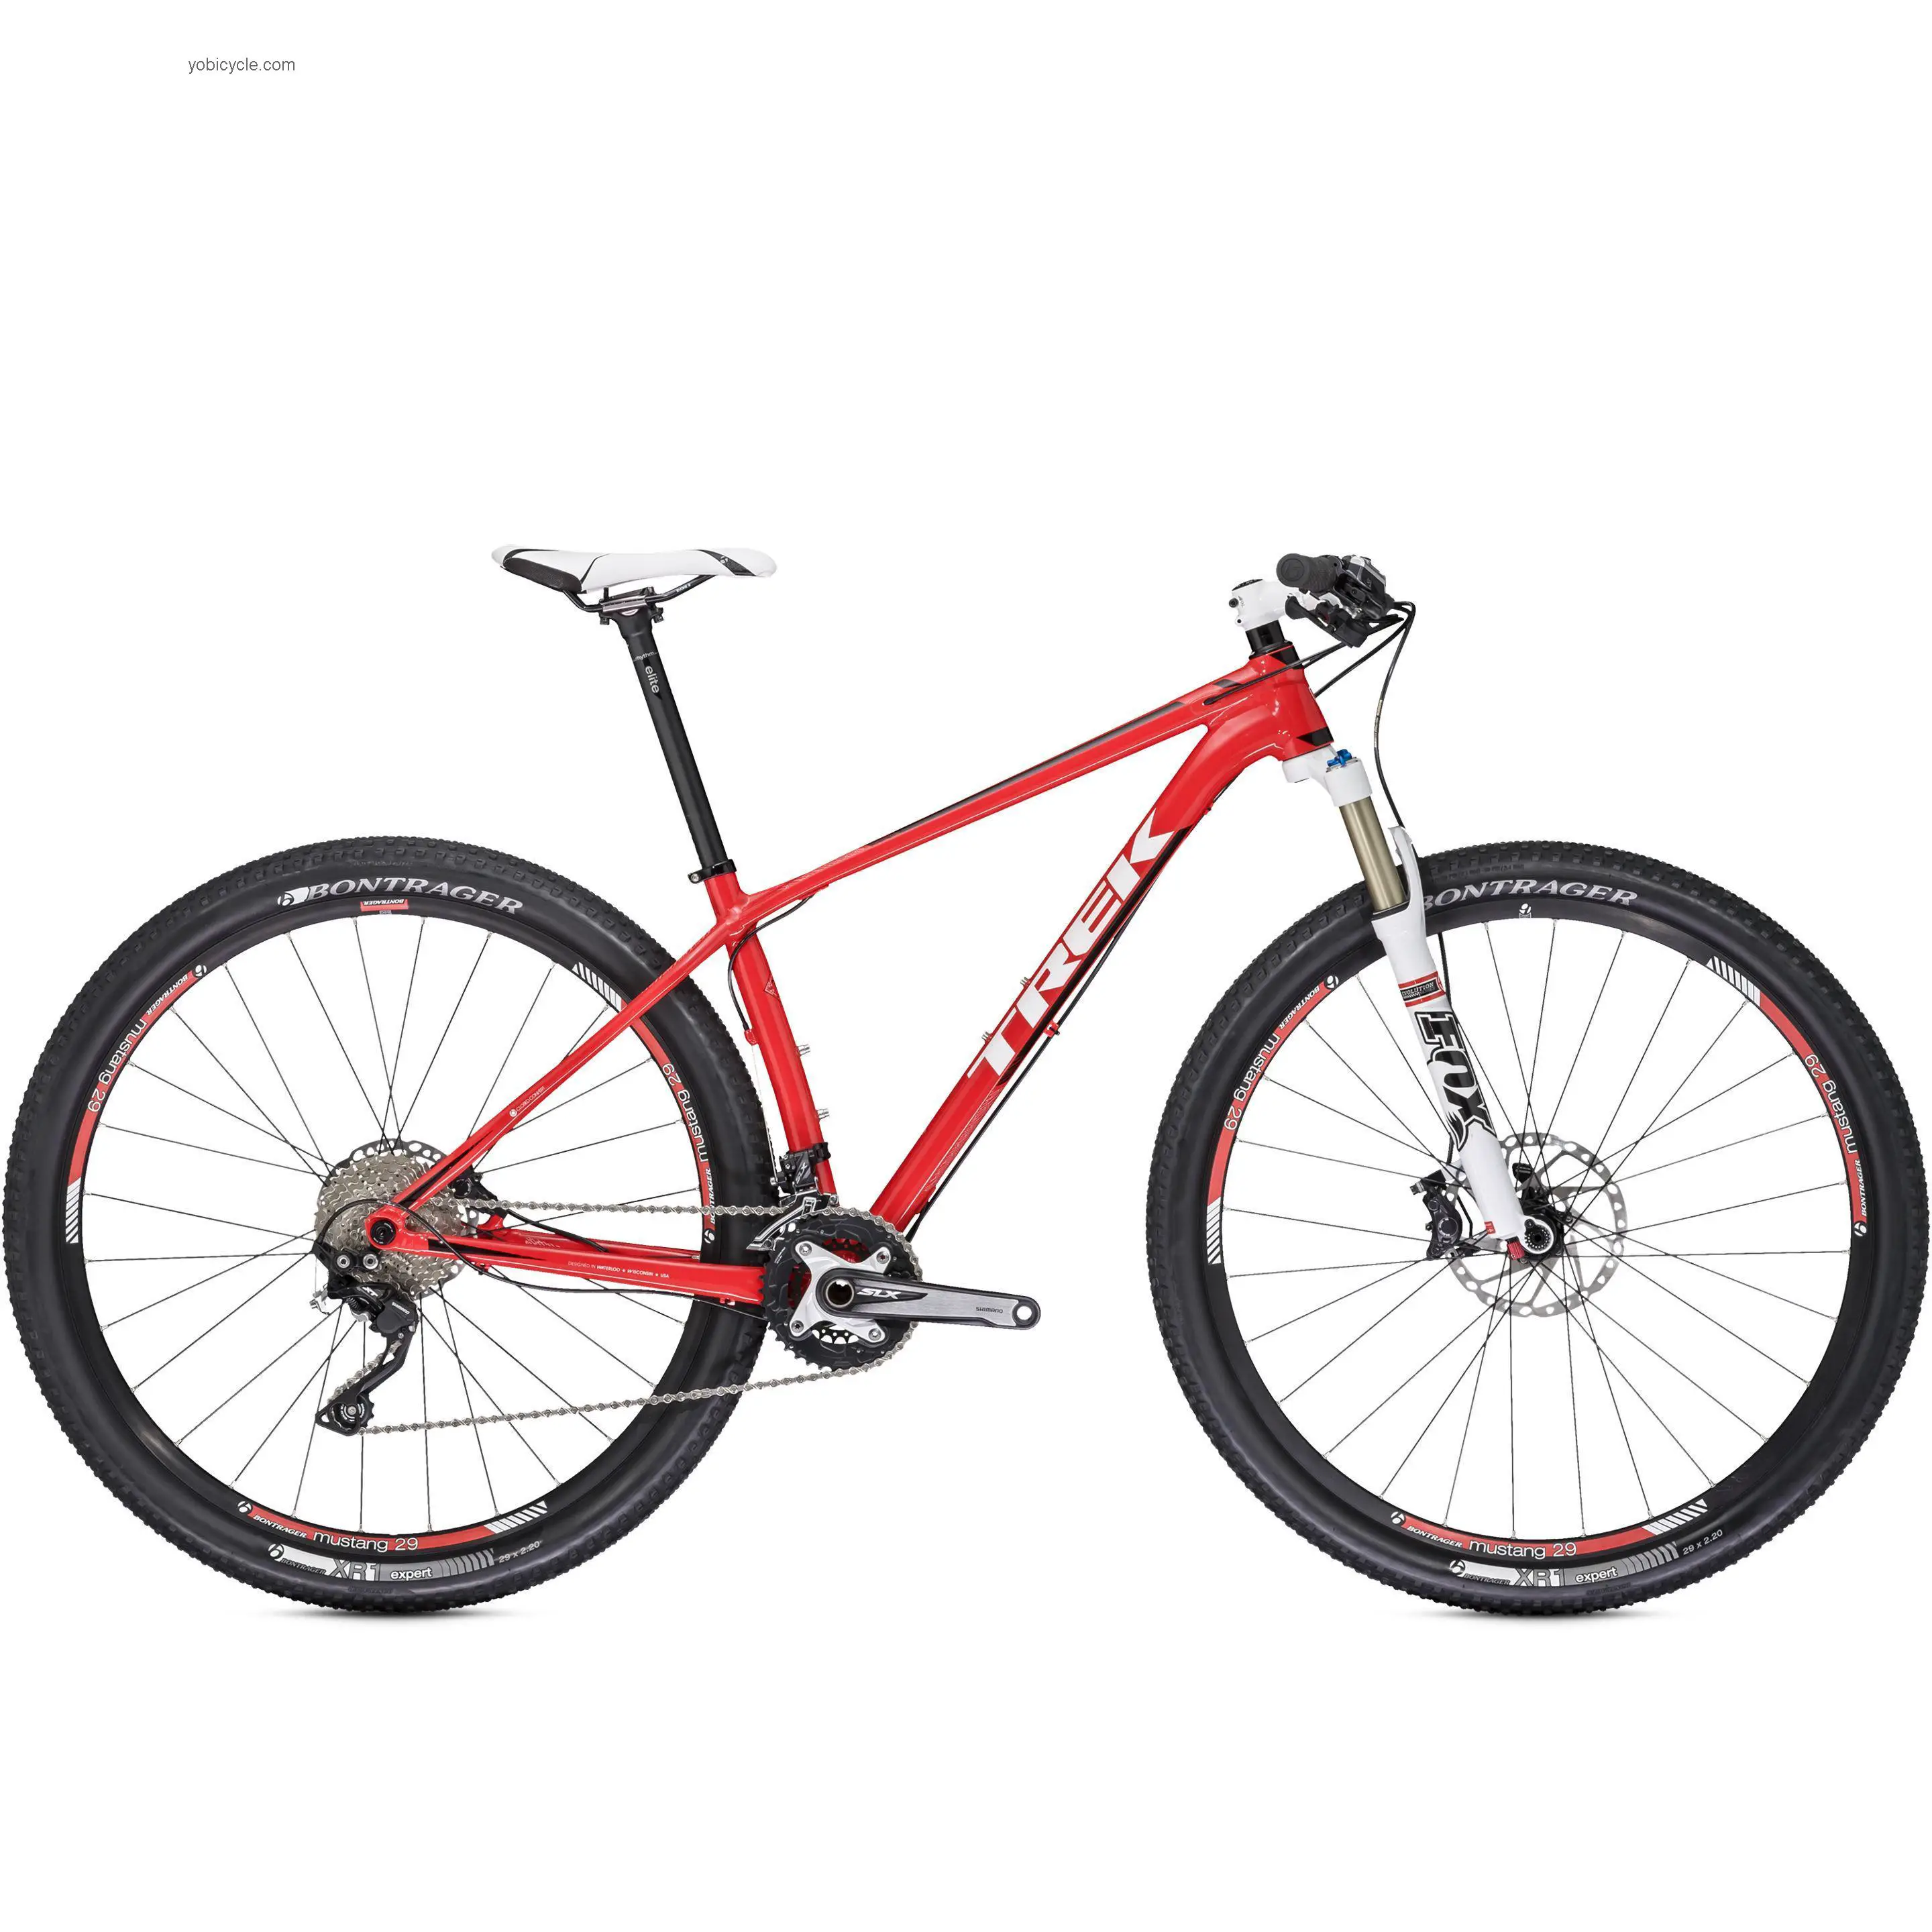 Trek Superfly 8 2014 comparison online with competitors